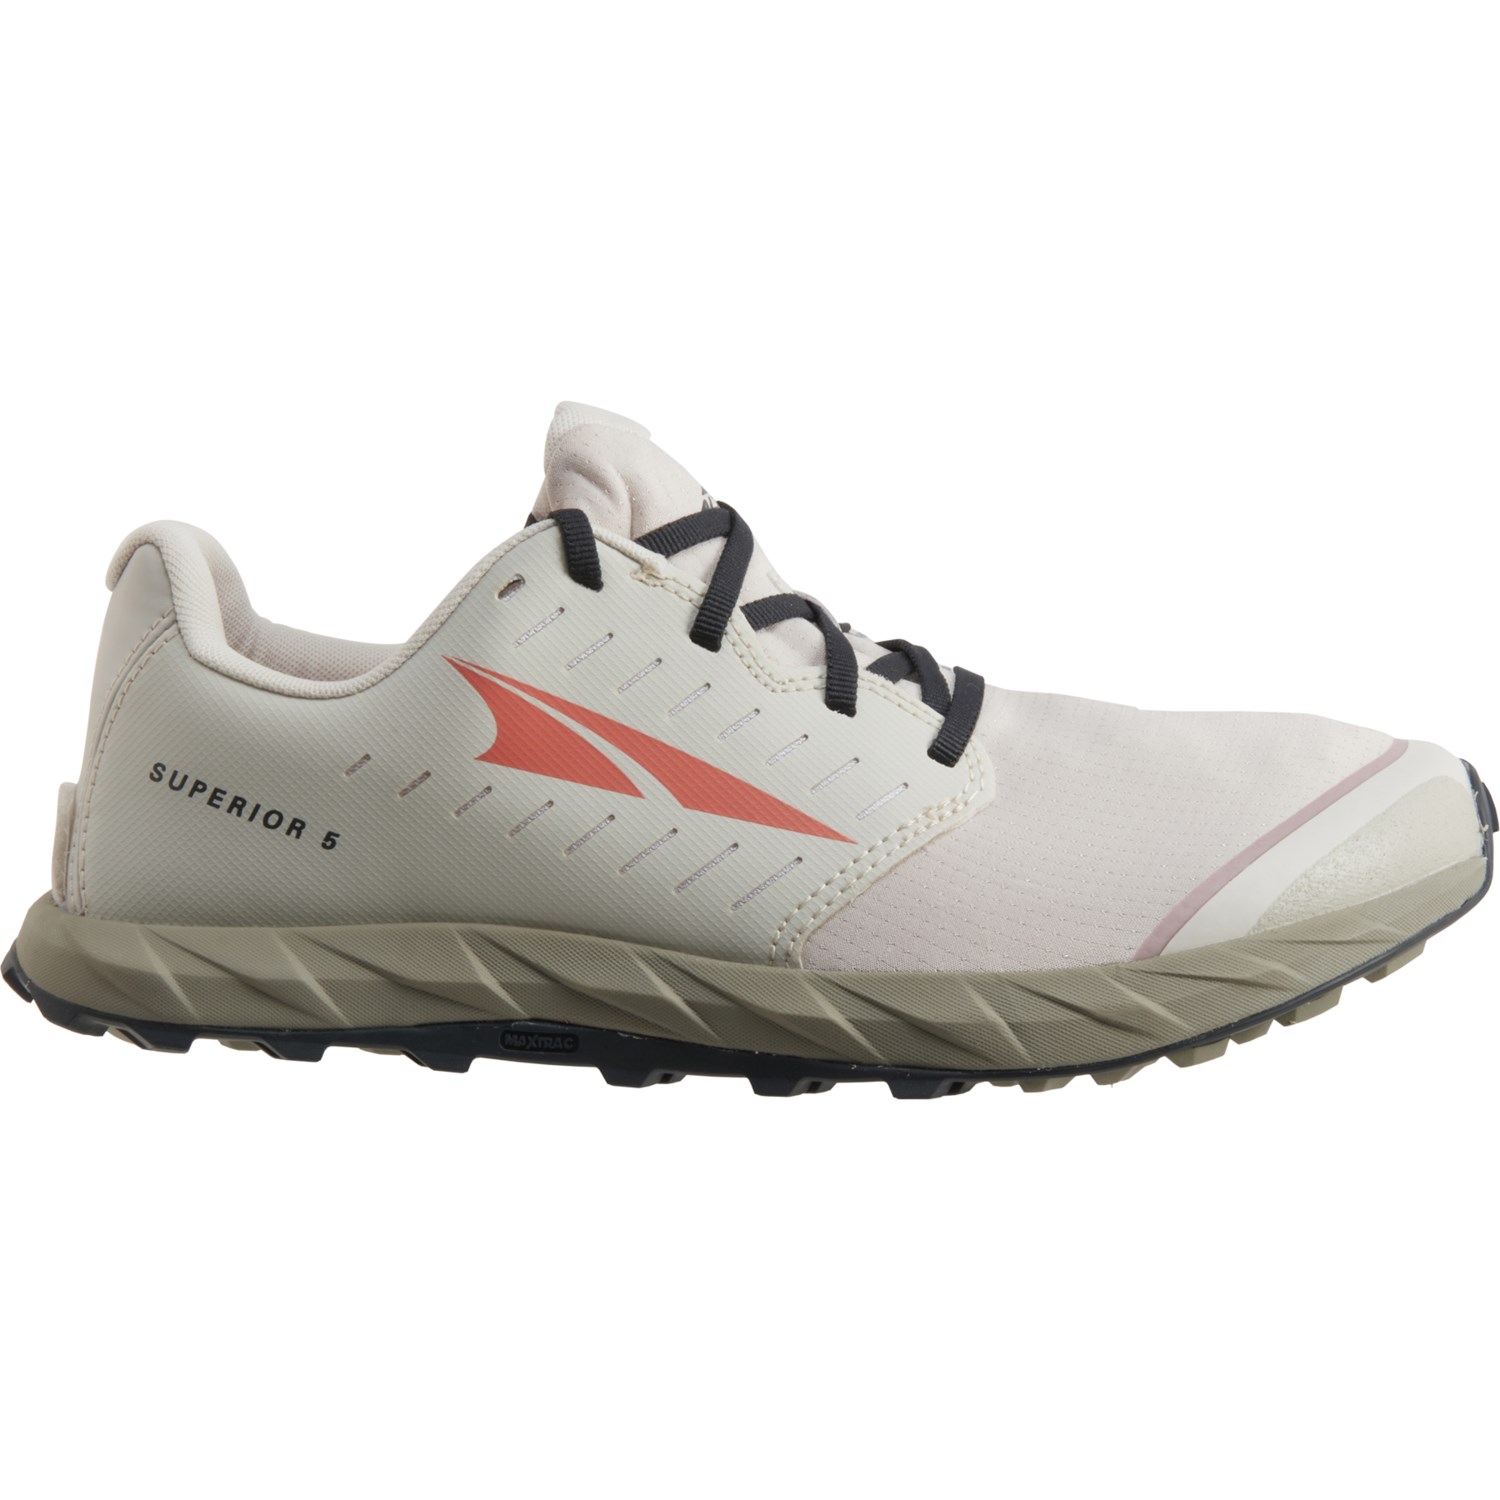 Altra Superior 5 Trail Running Shoes (For Men) - Save 40%